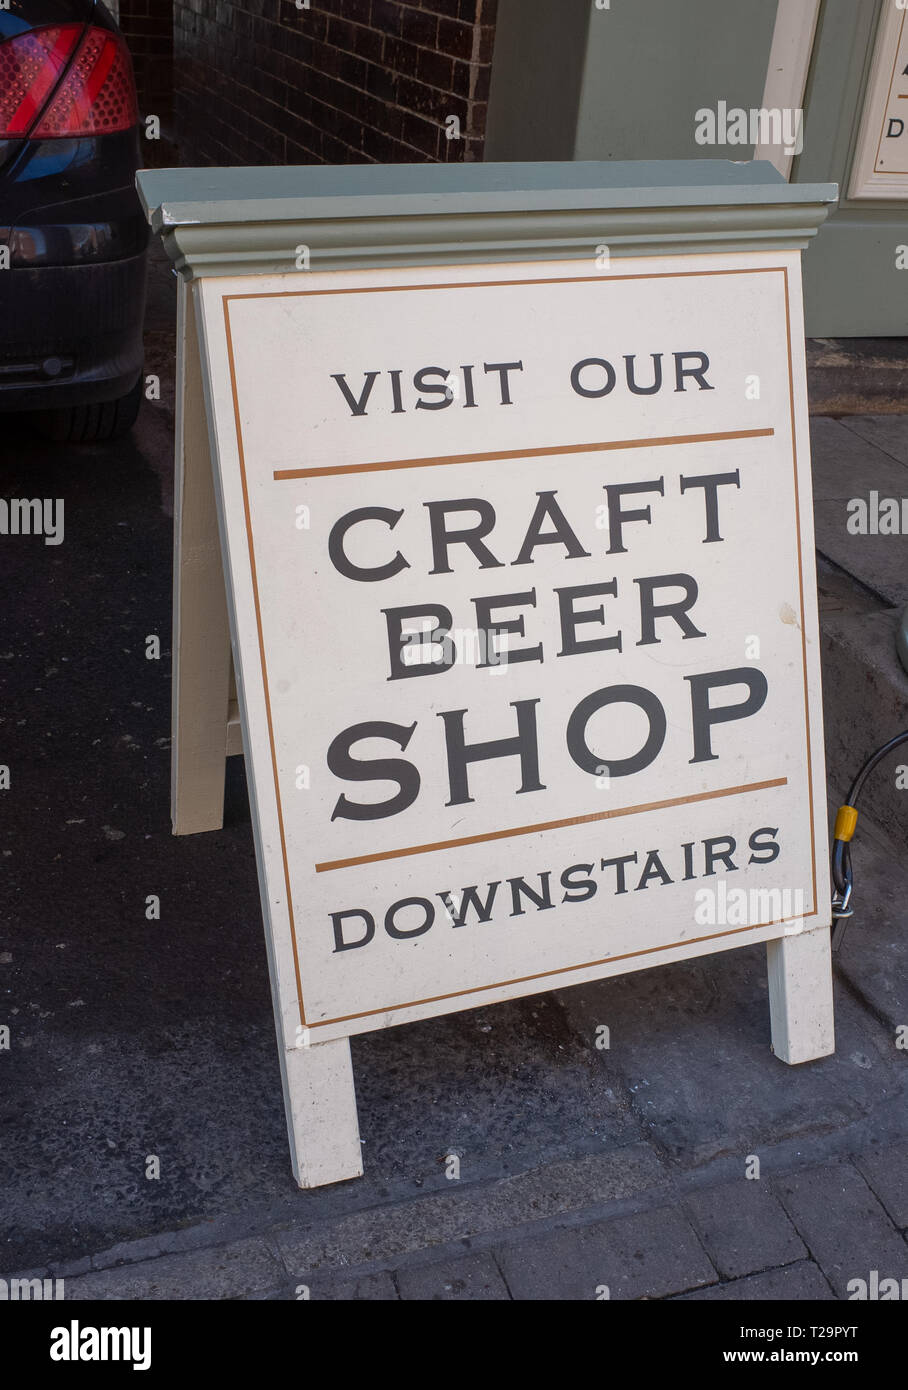 Craft beer shop sign Stock Photo